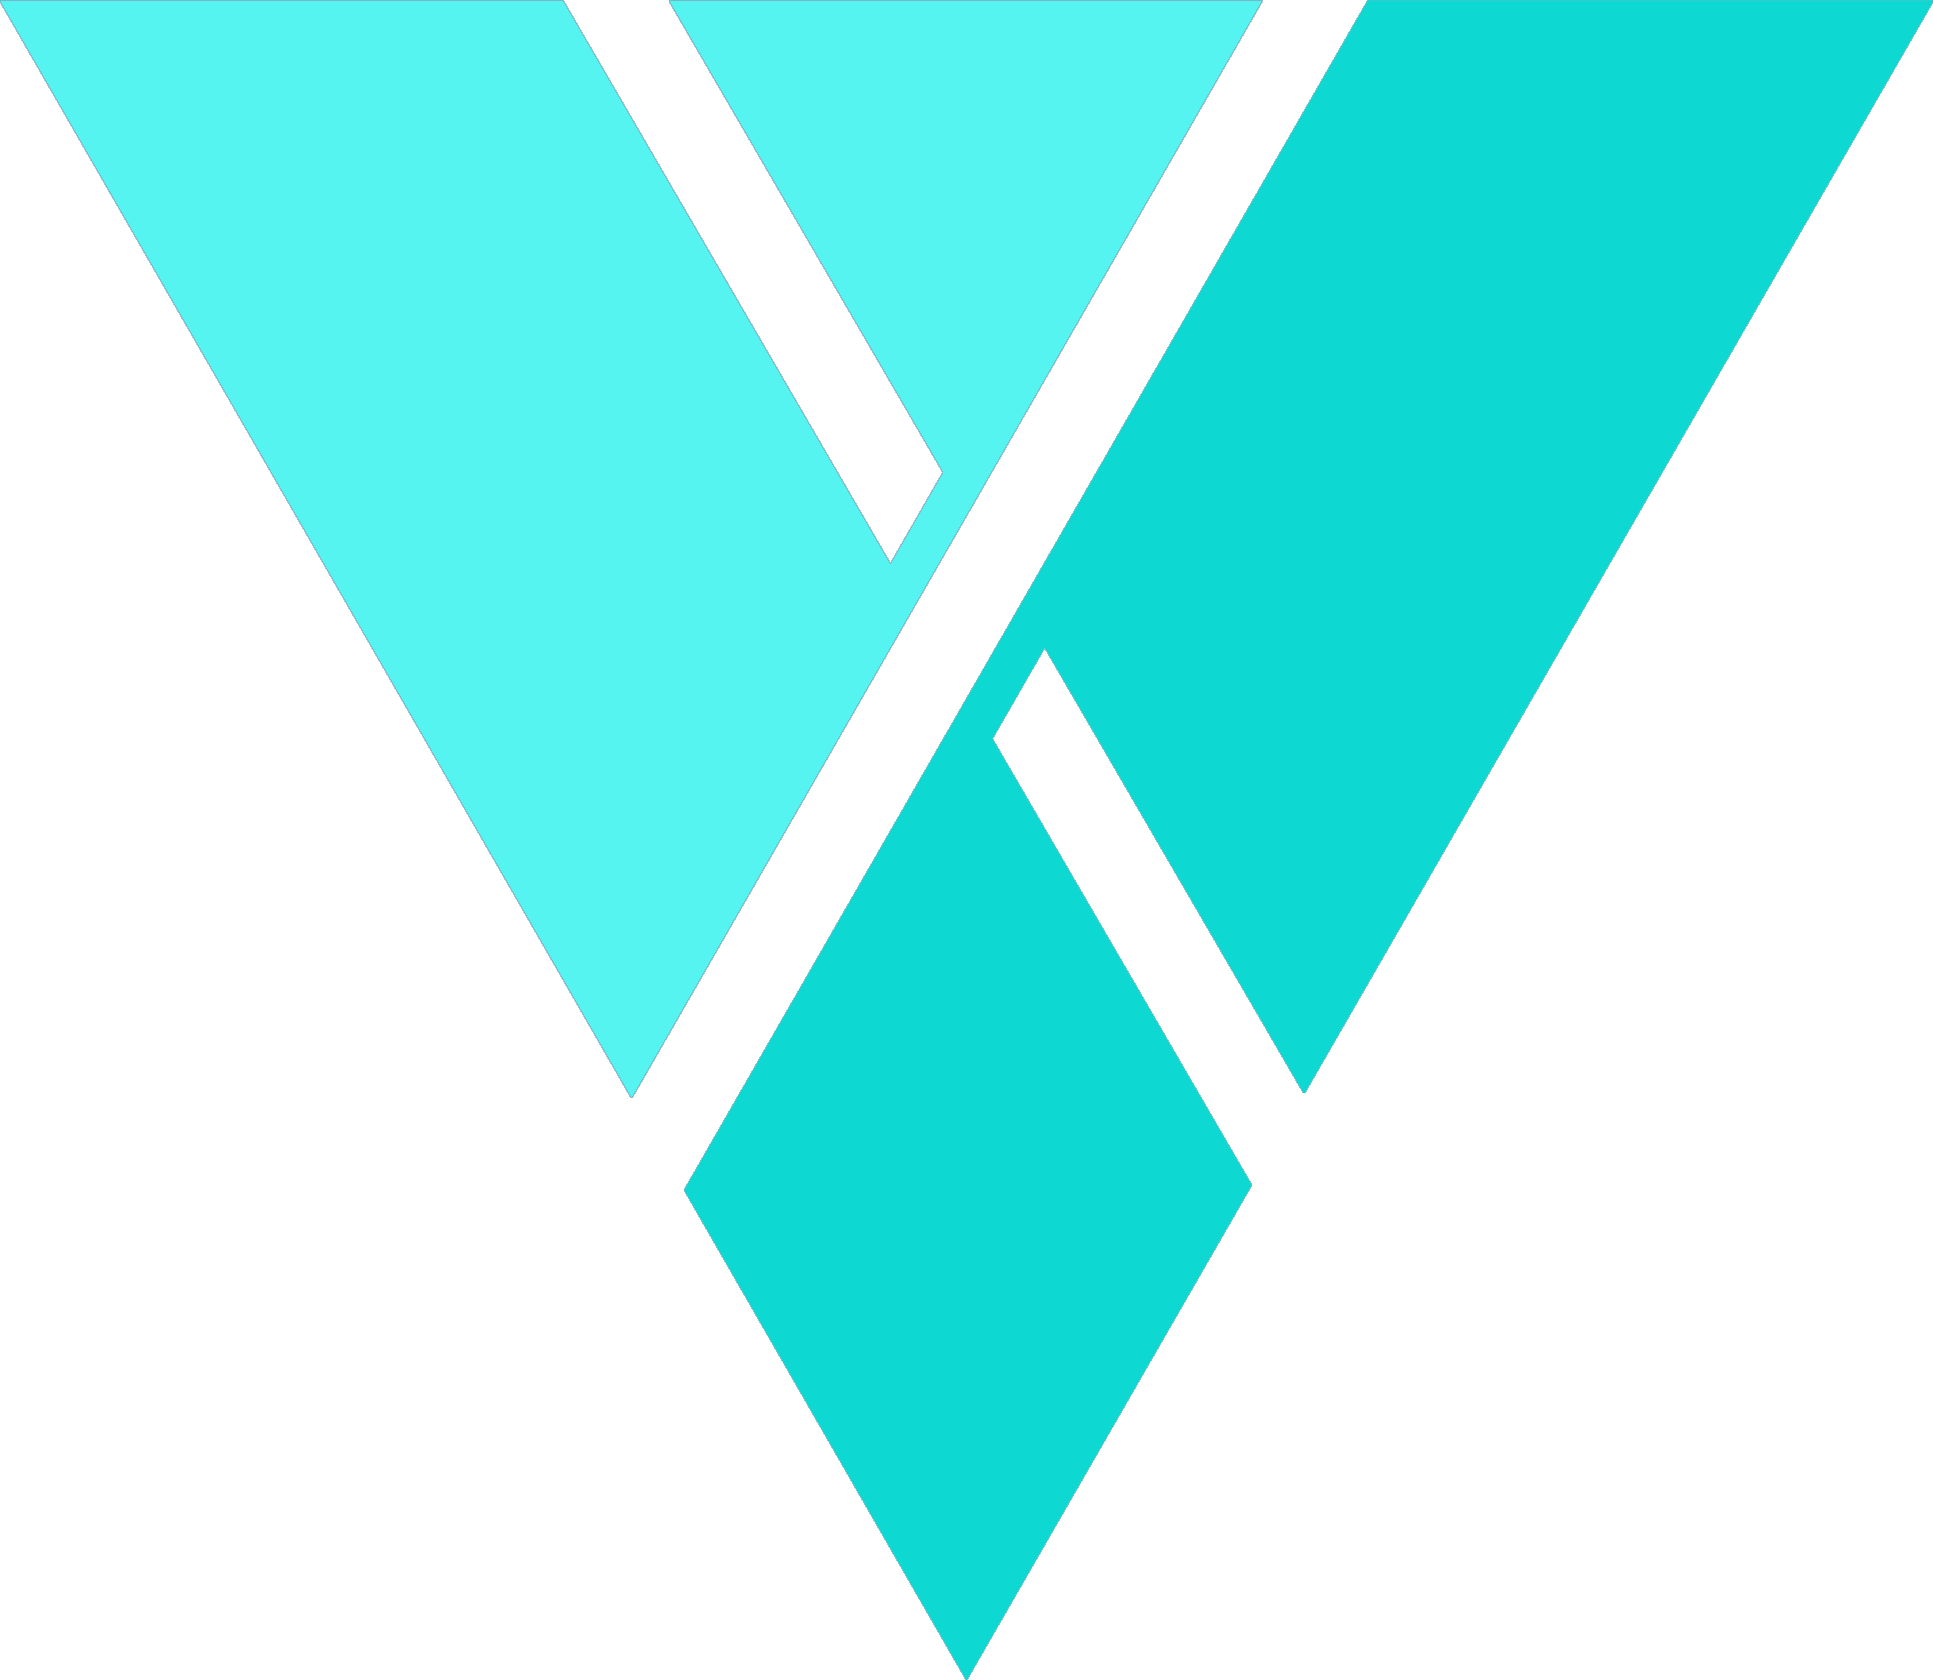 xby_logo.png